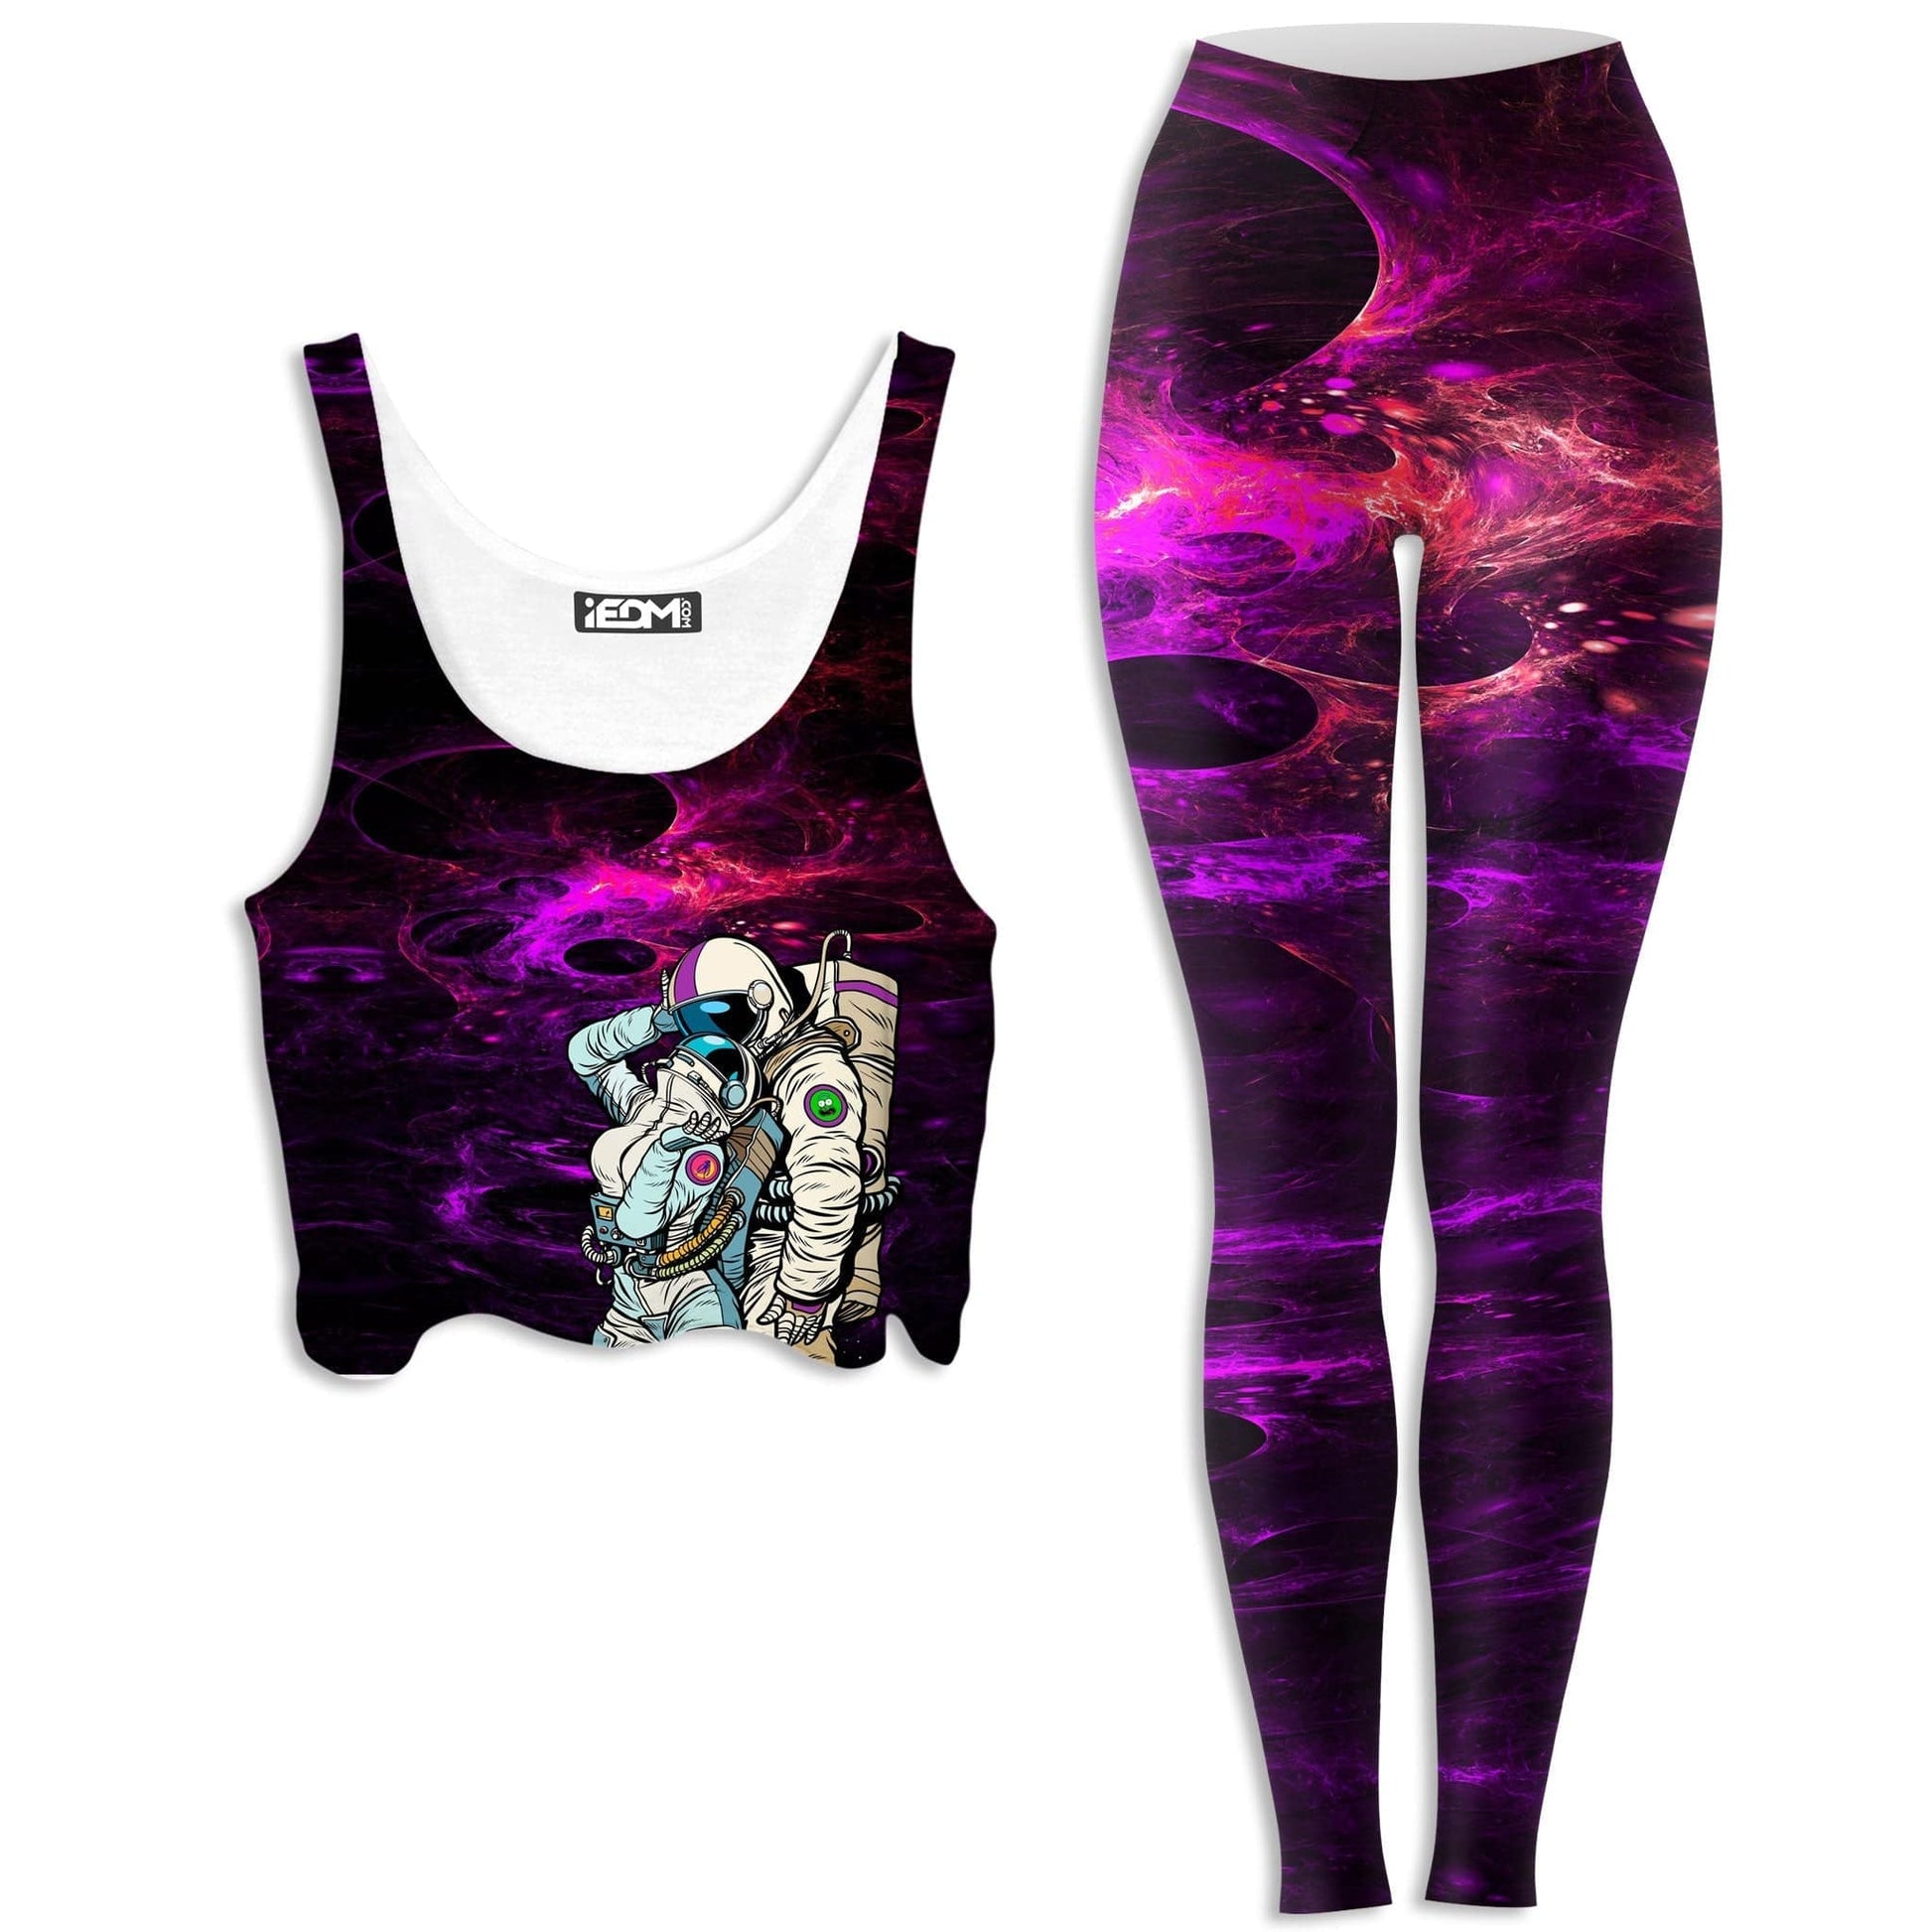 We Landed Crop Top and Leggings Combo, Noctum X Truth, | iEDM